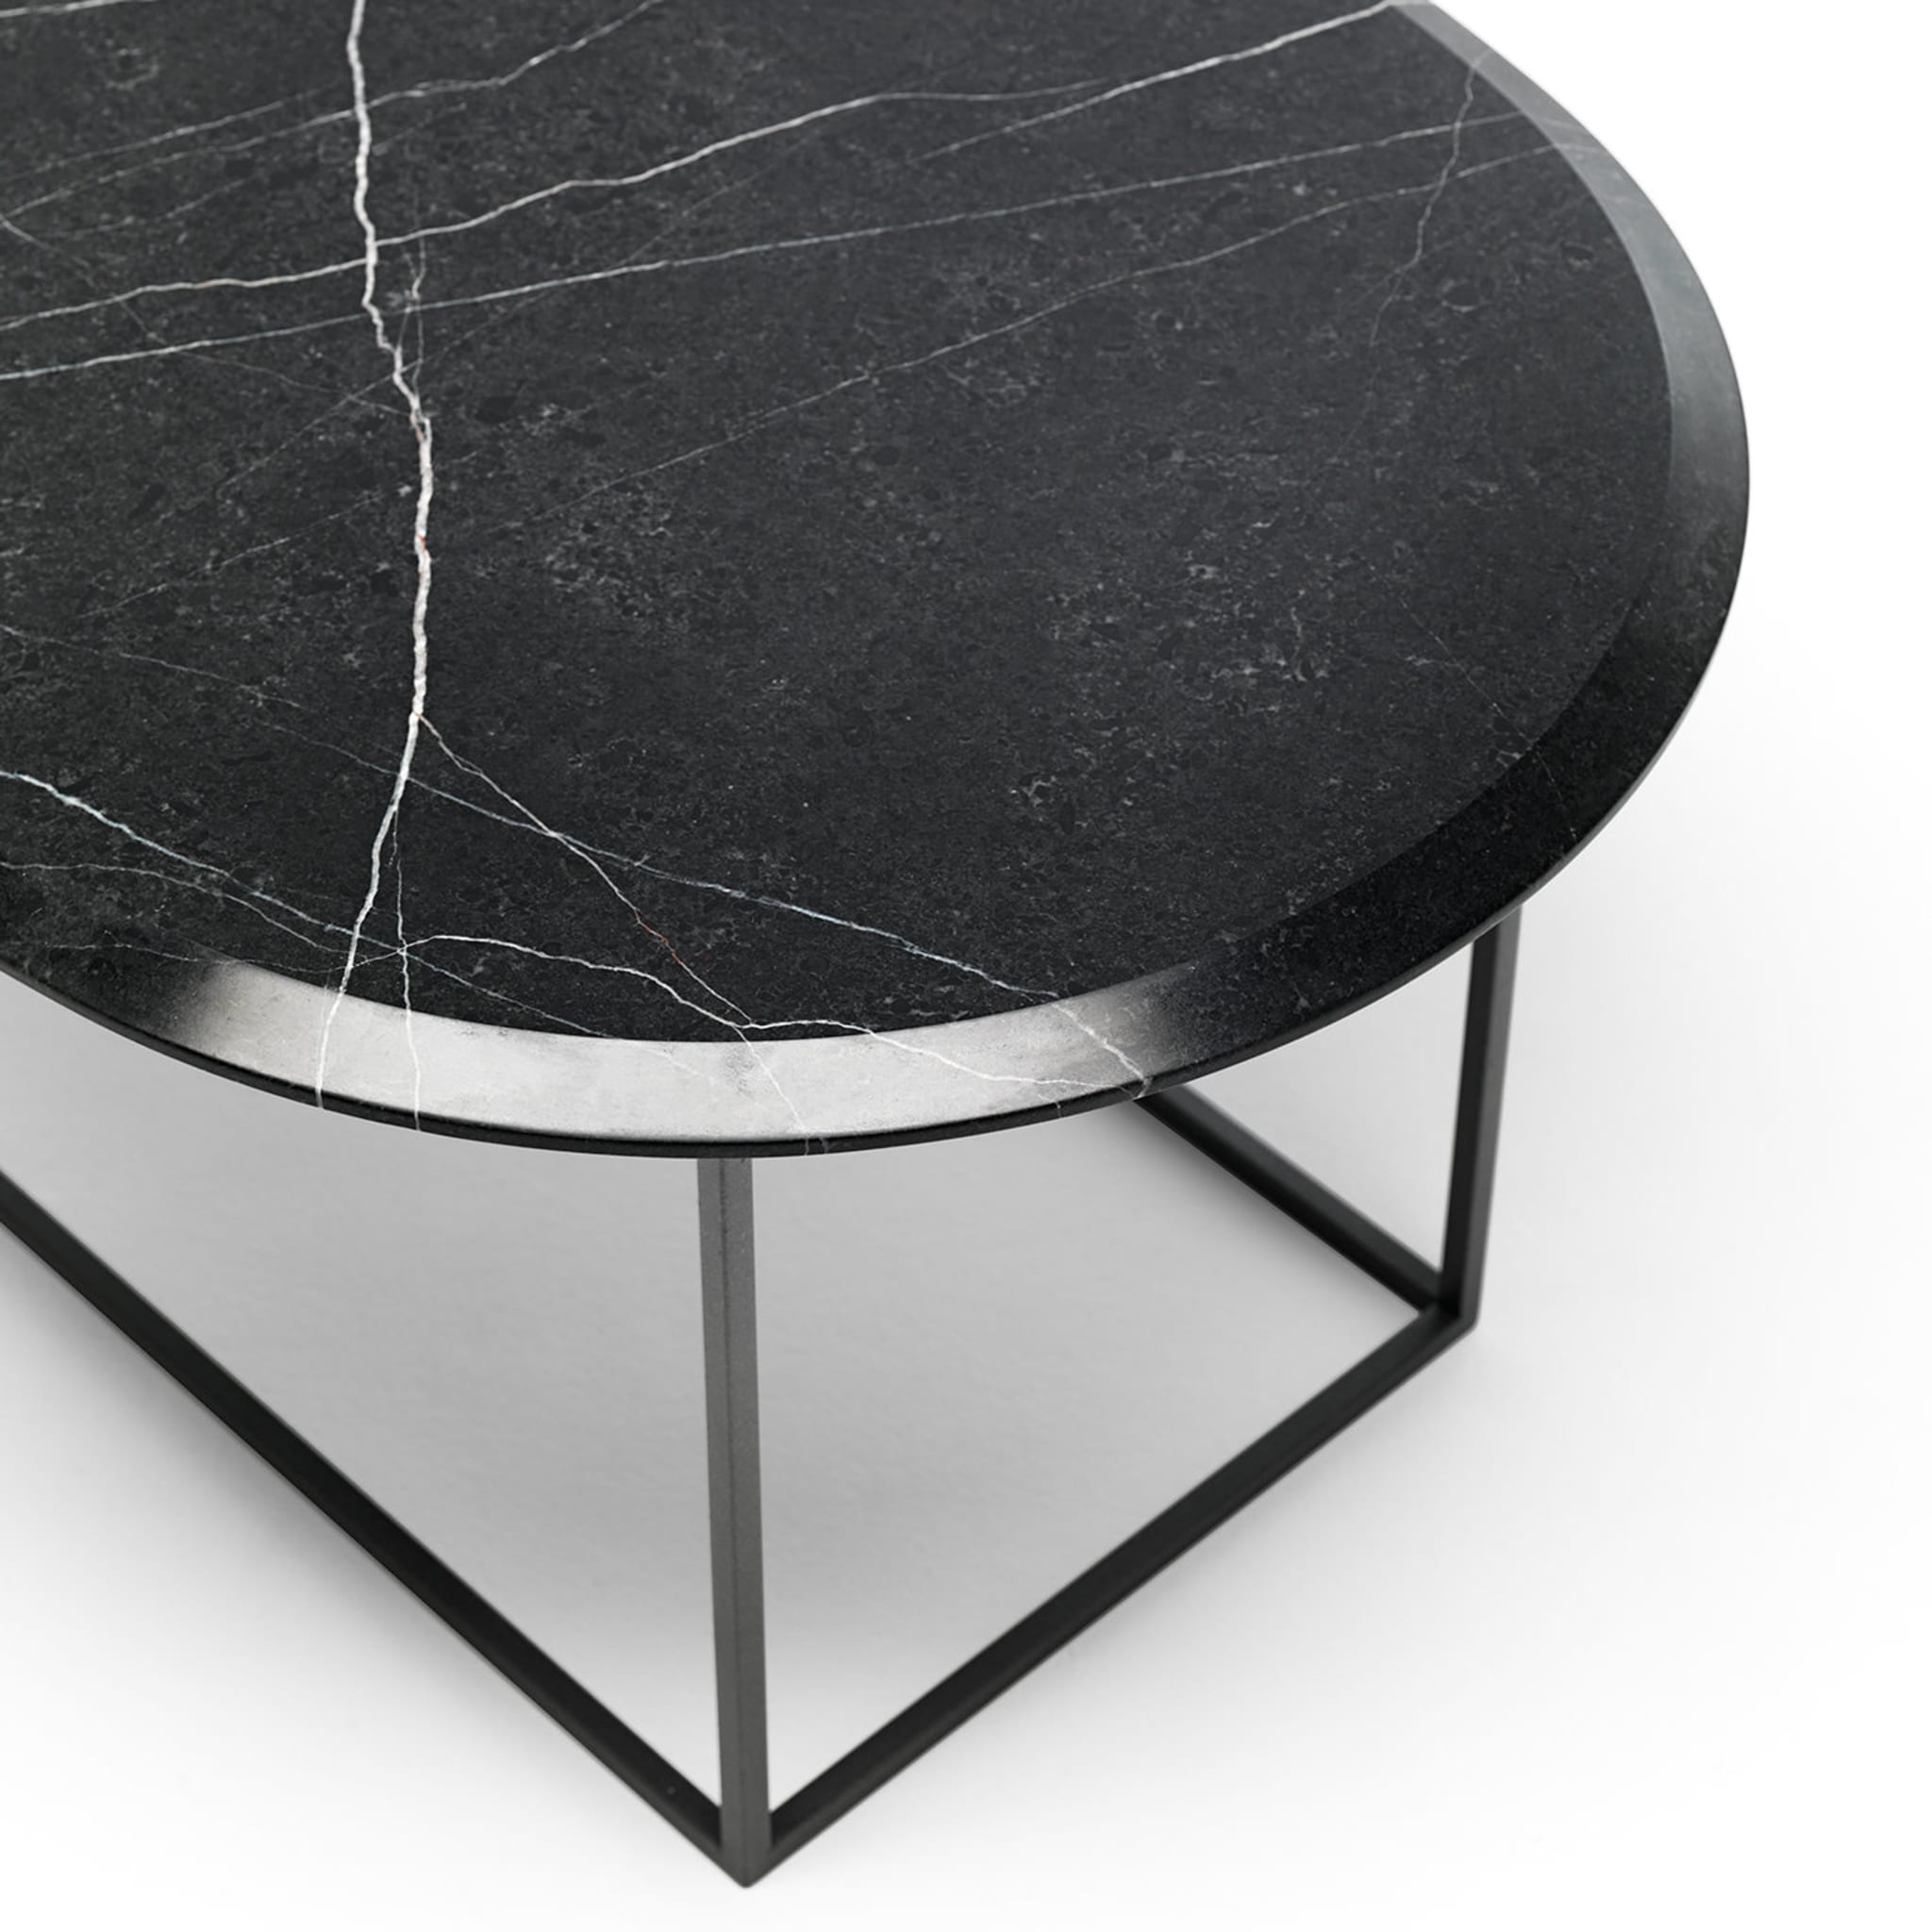 MT Low Coffee Table with New Saint Laurent Marble Top - Alternative view 2